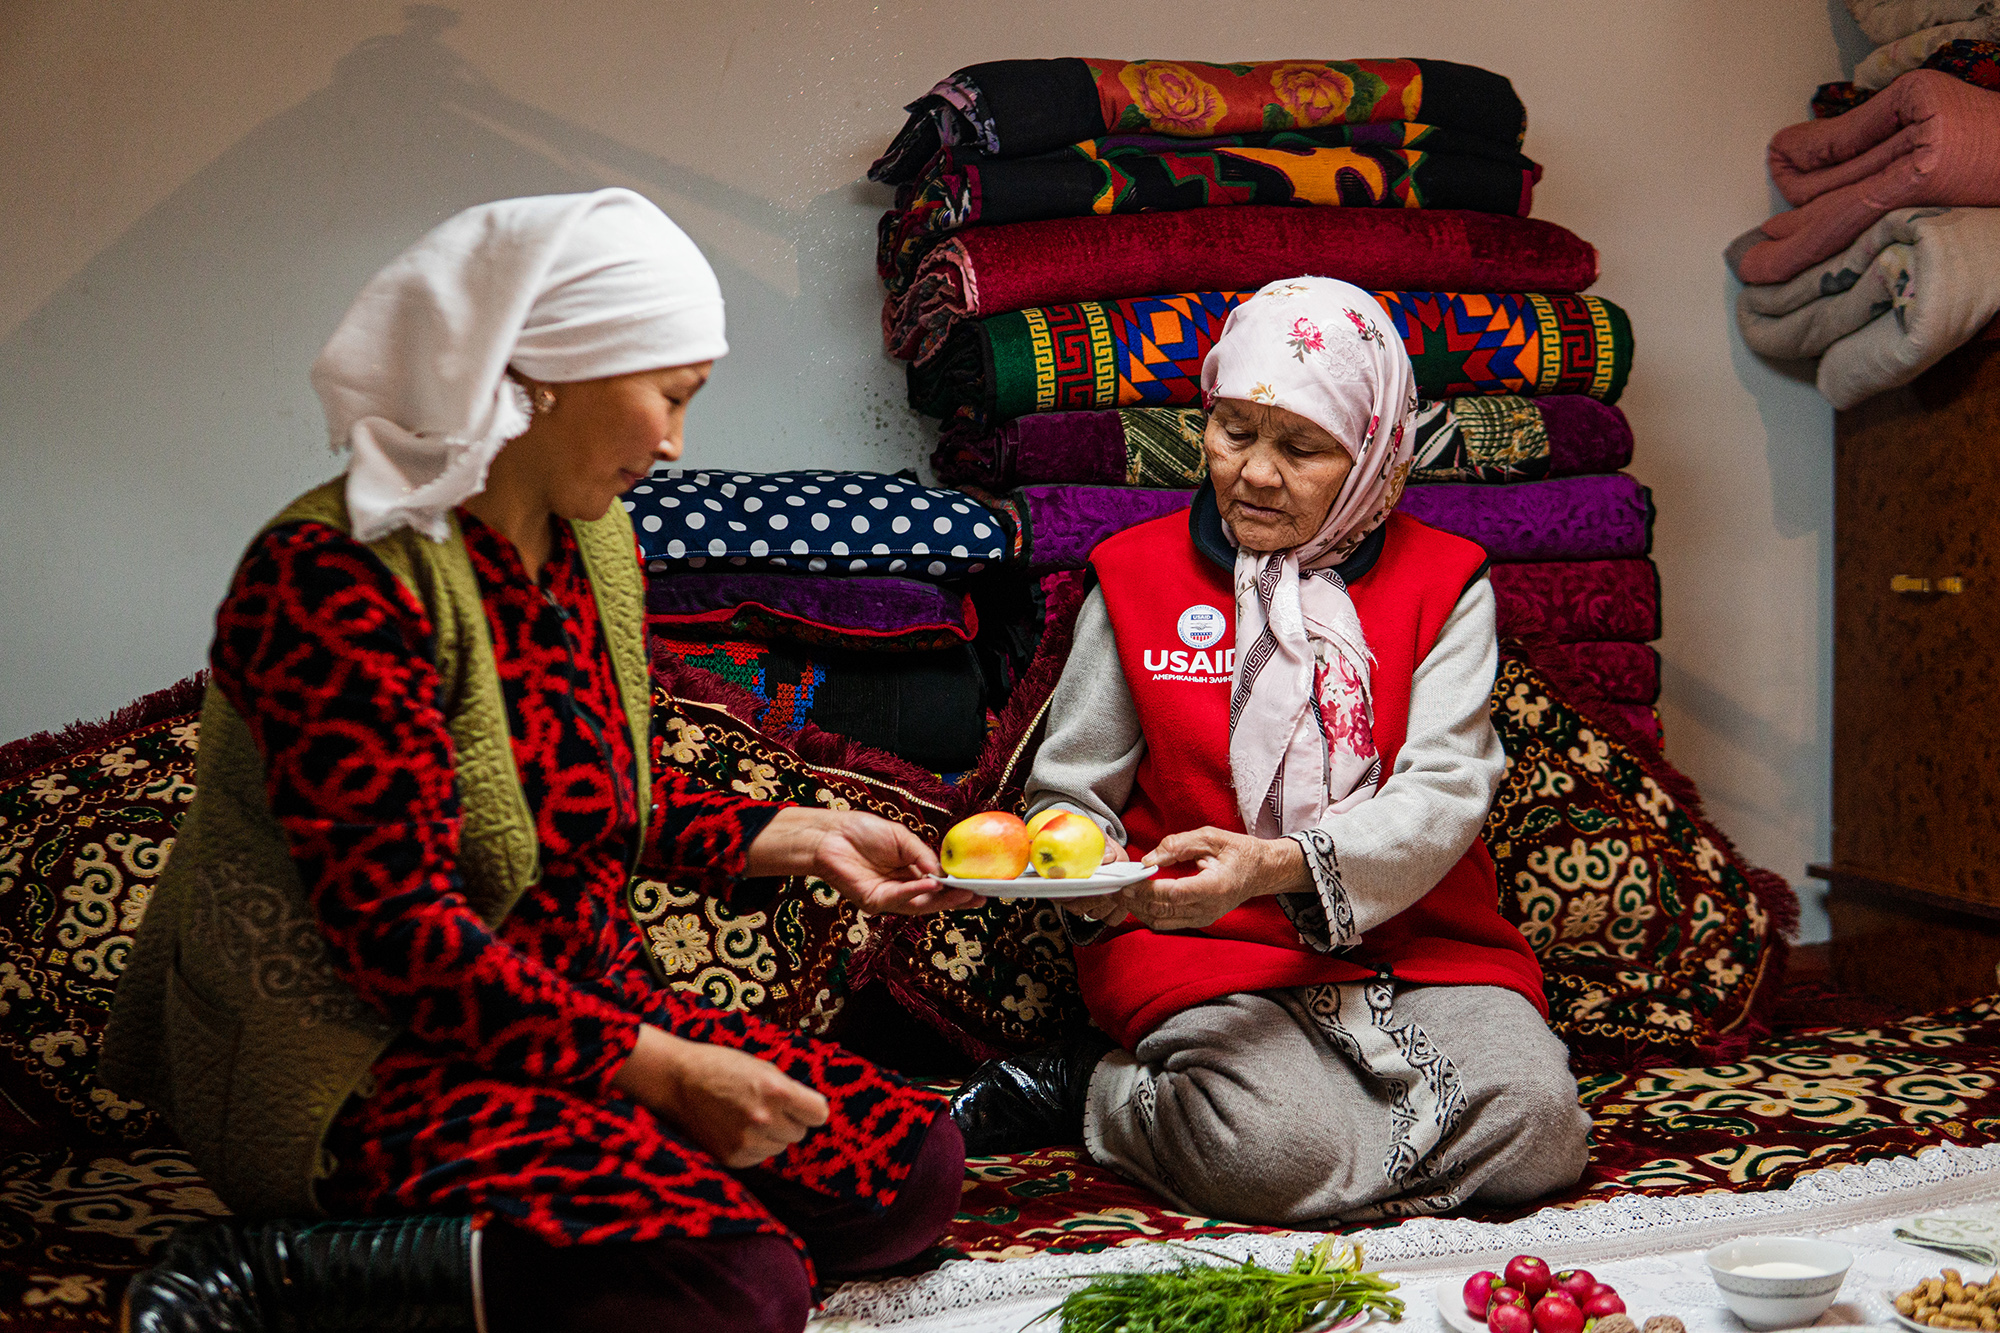 Two women kneeling, sharing a meal